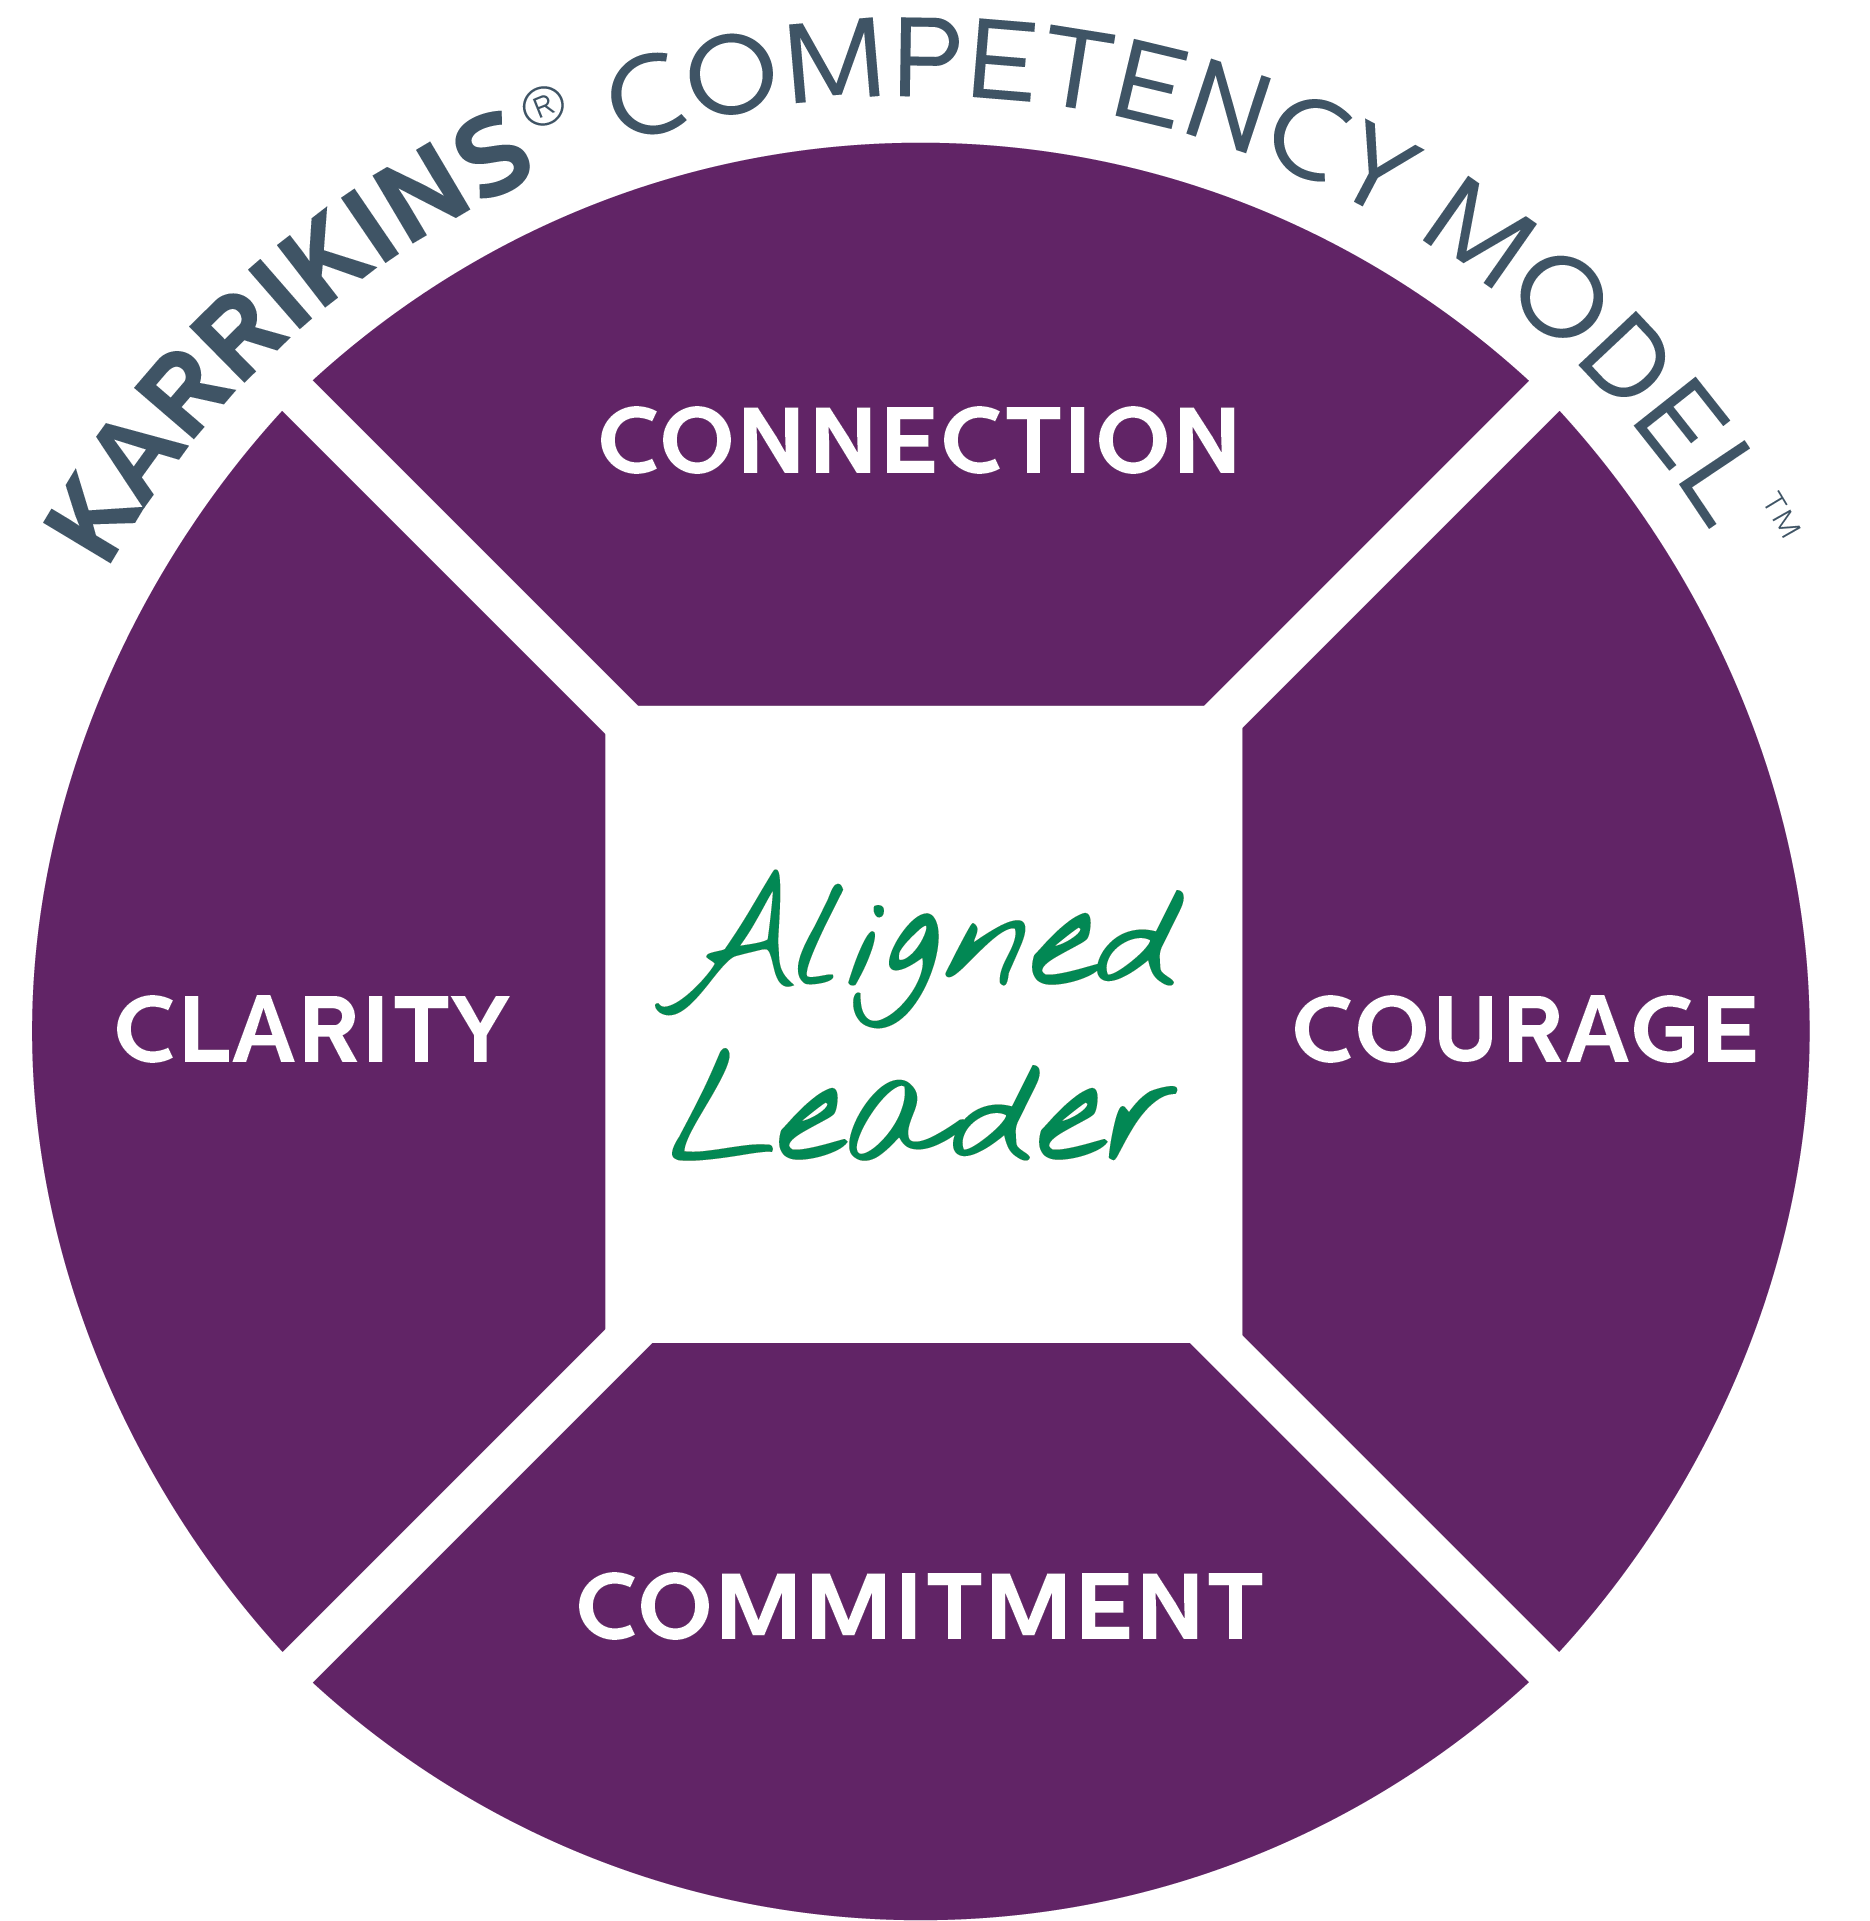 Graphic of the KARRIKINS Competency Model